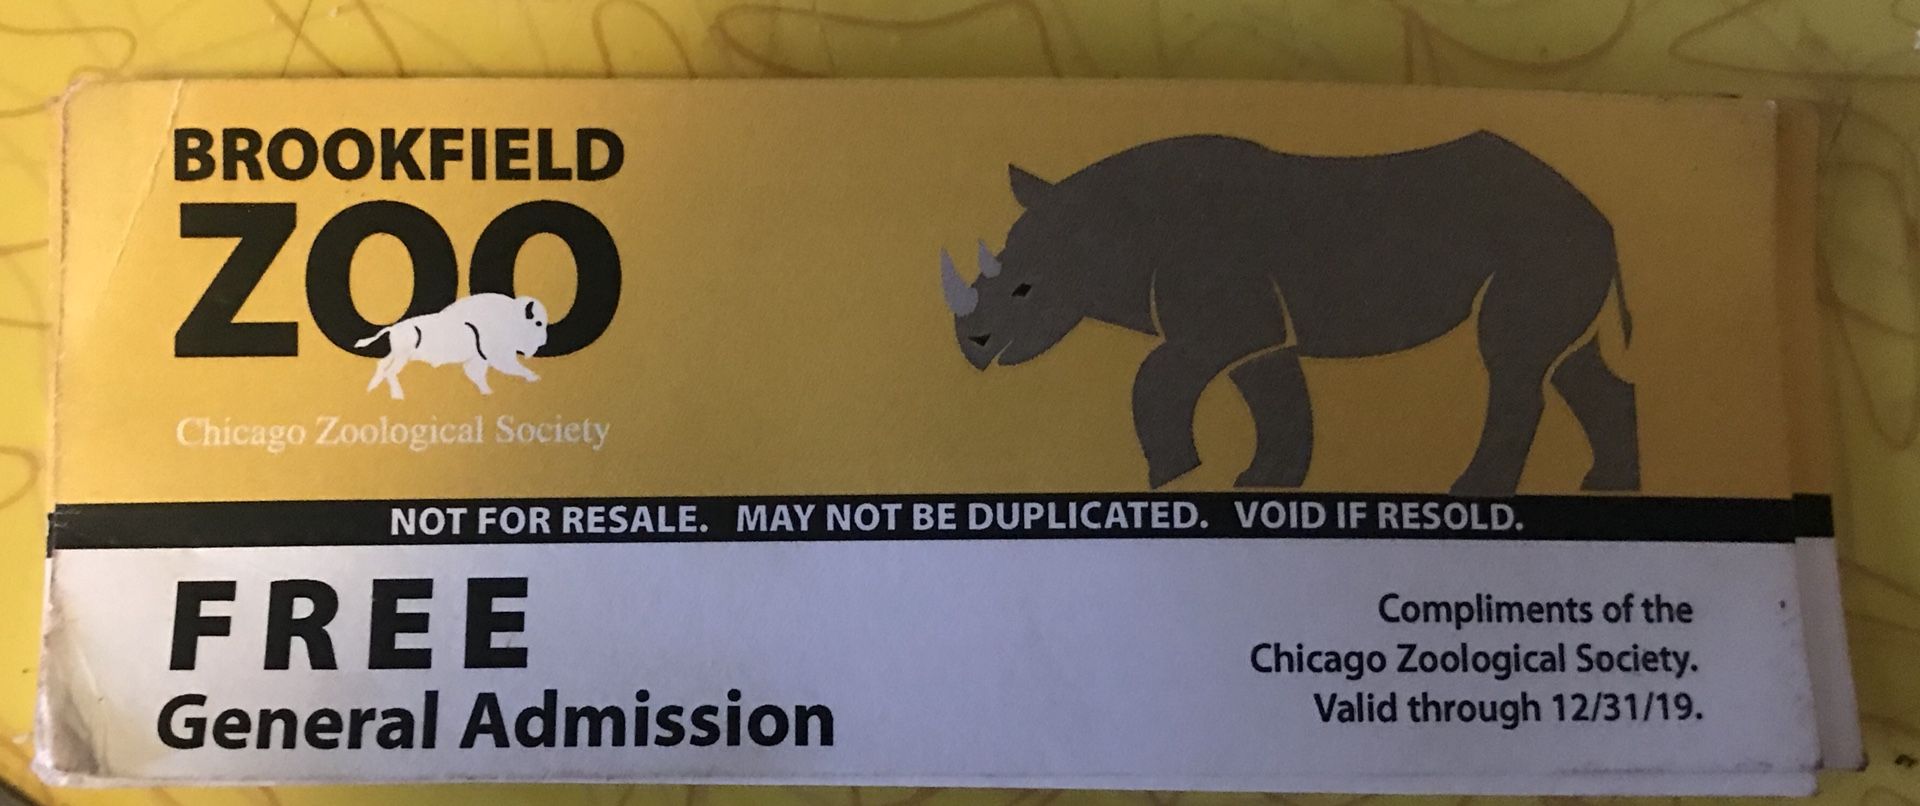 Admission for Brookfield zoo